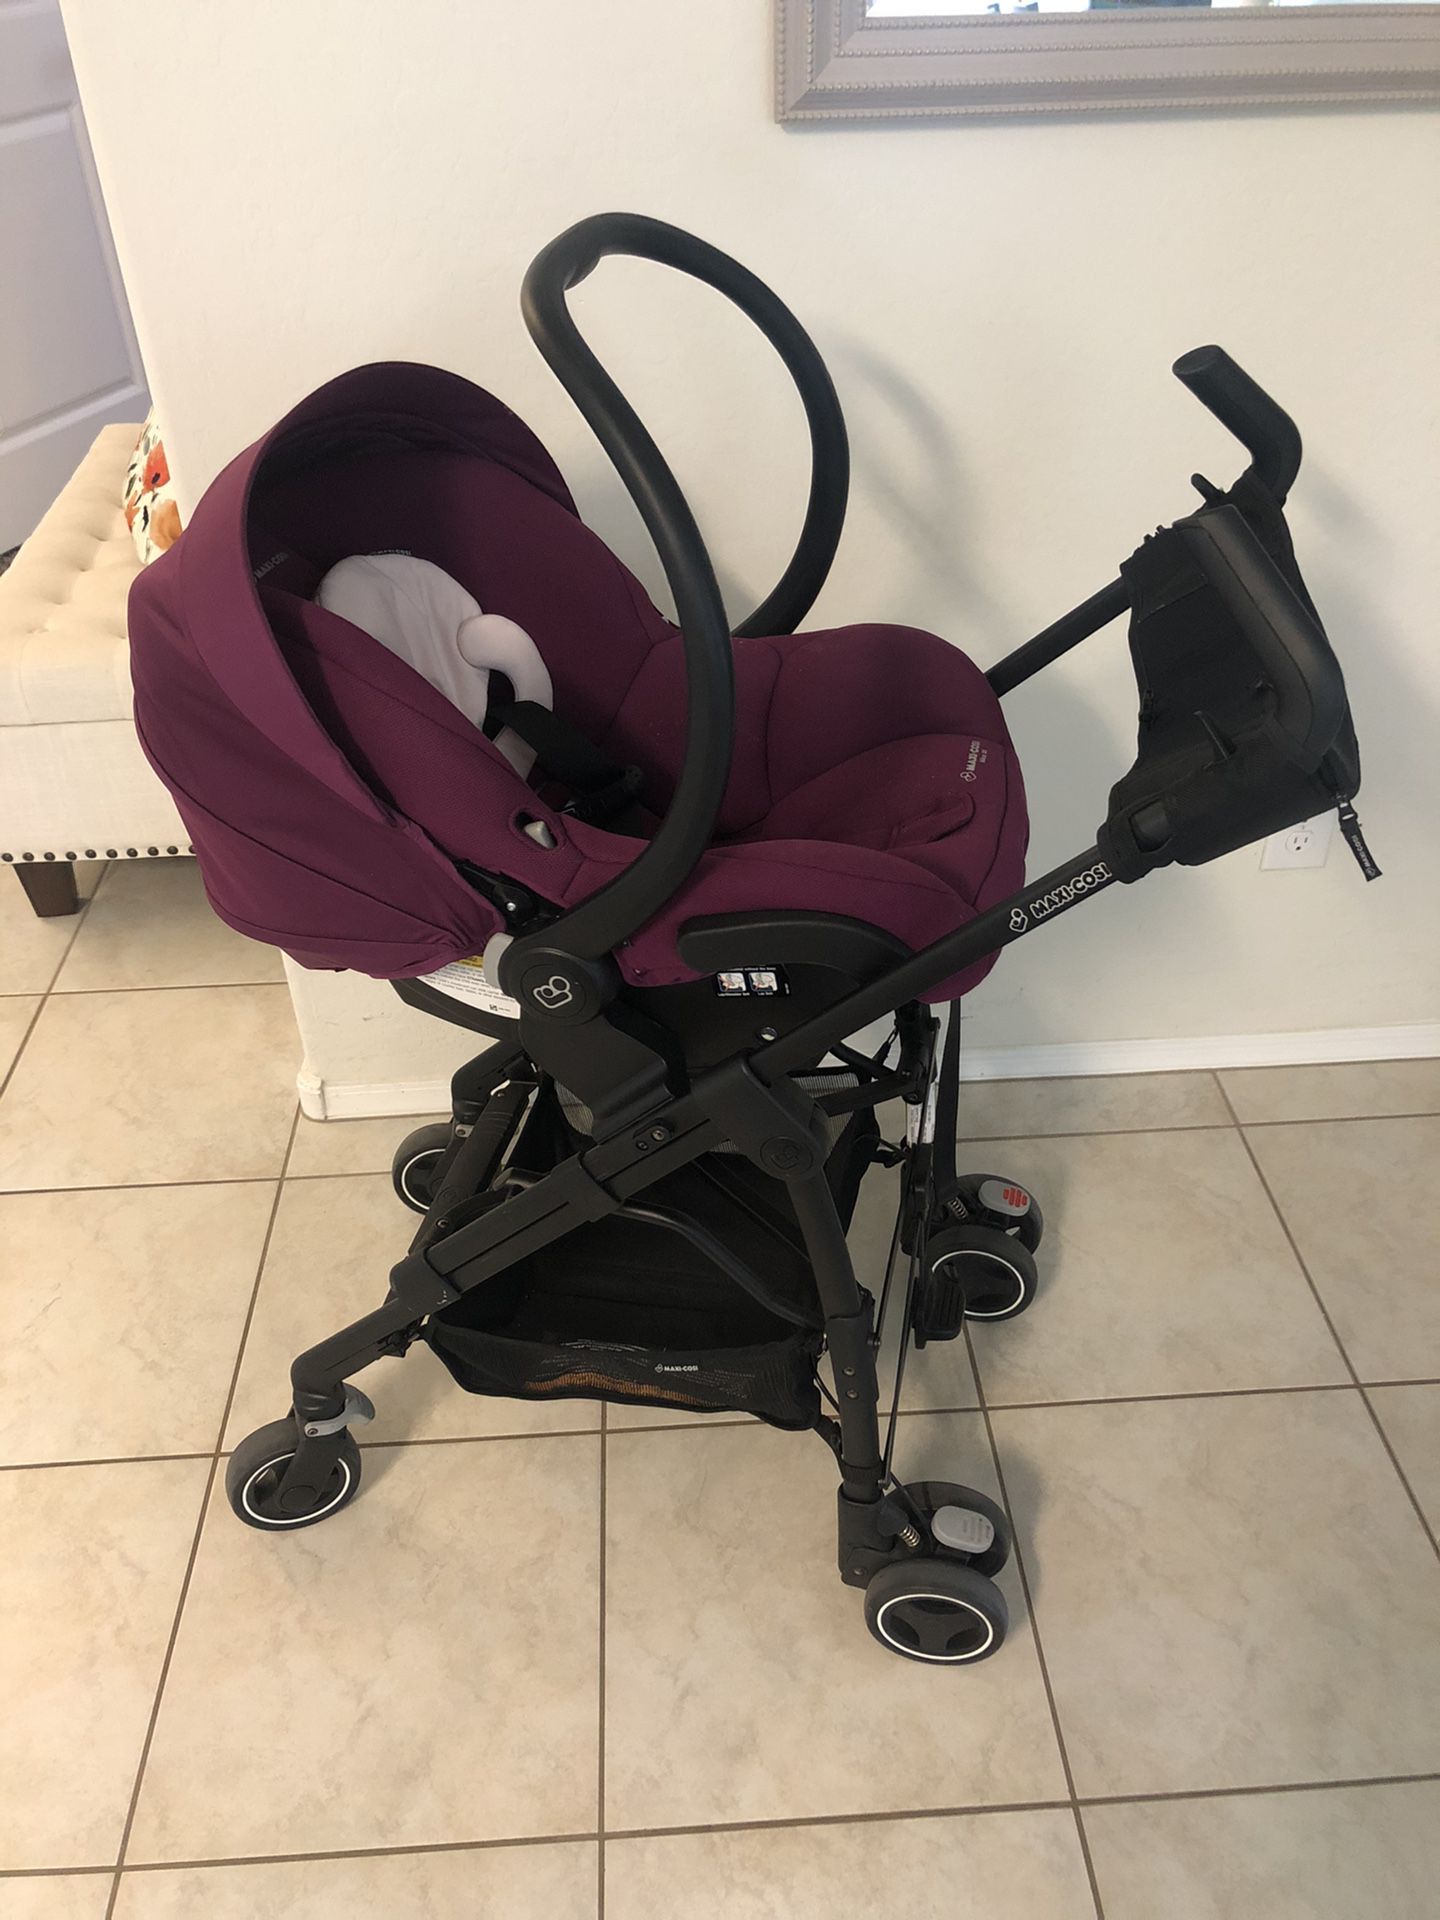 Maxi cosi baby car seat and stroller